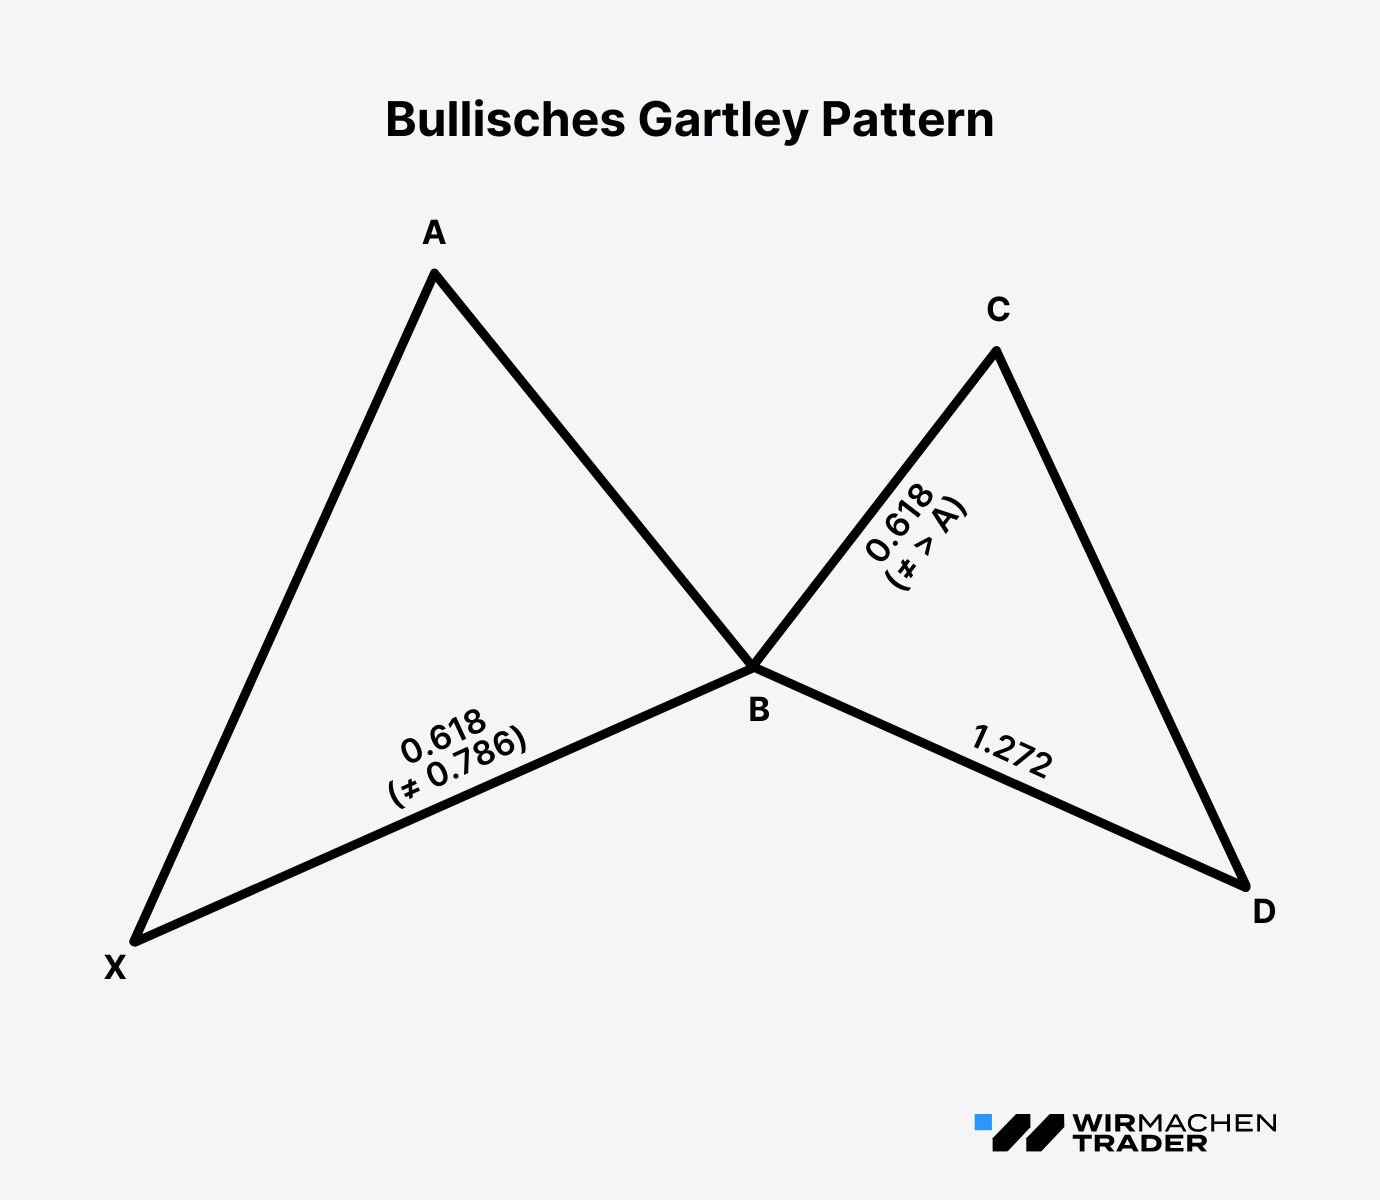 The bullish Gartley pattern with the exact rules